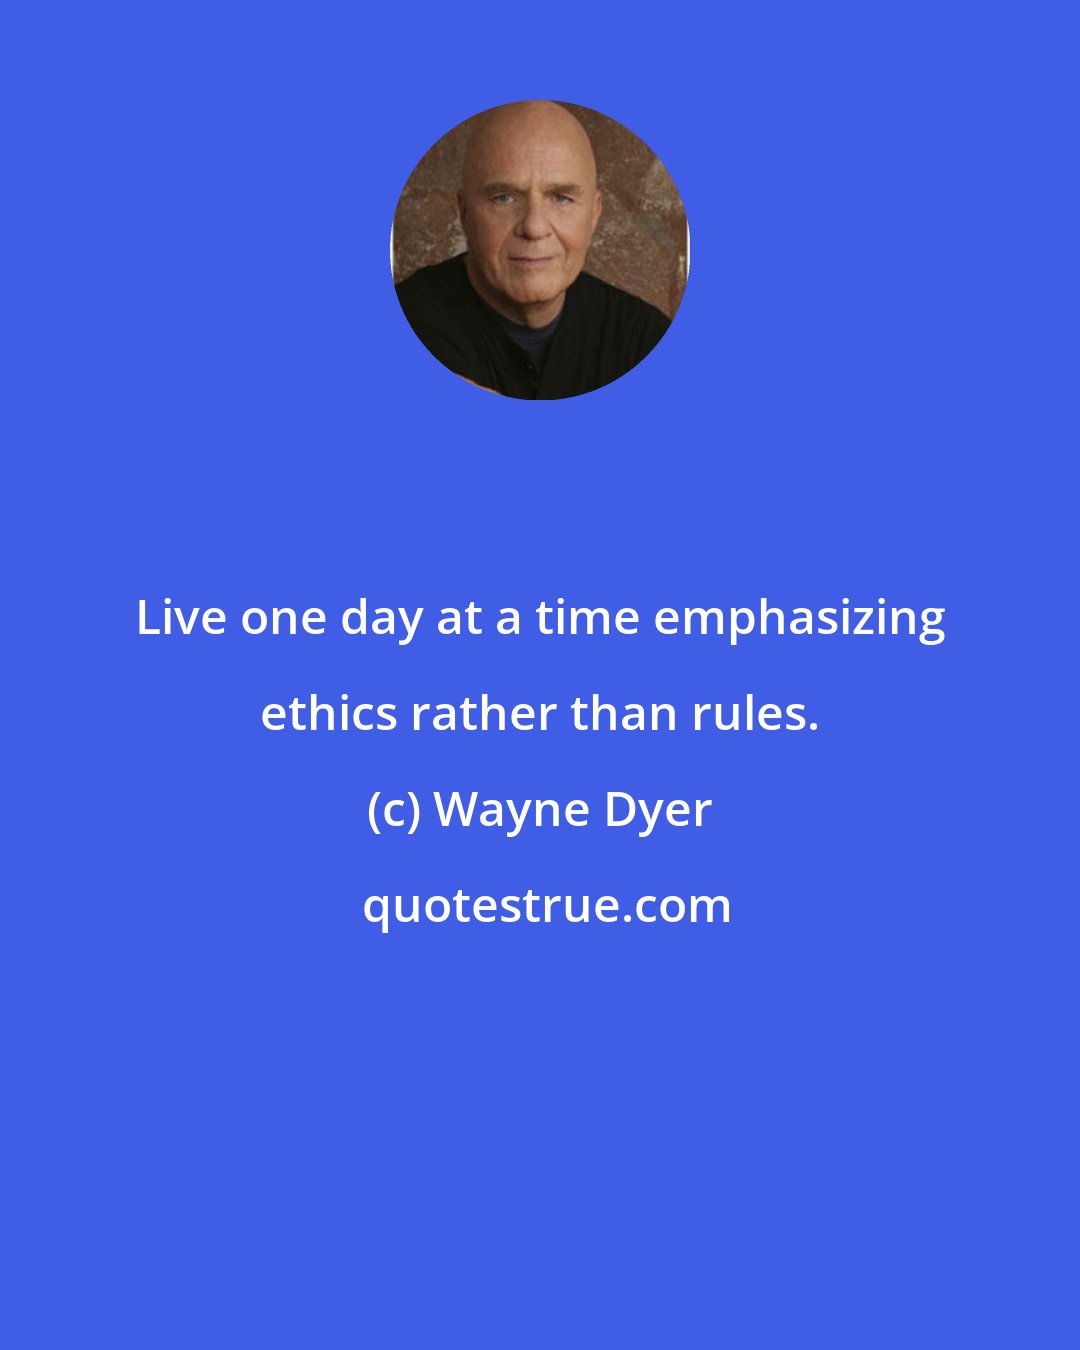 Wayne Dyer: Live one day at a time emphasizing ethics rather than rules.